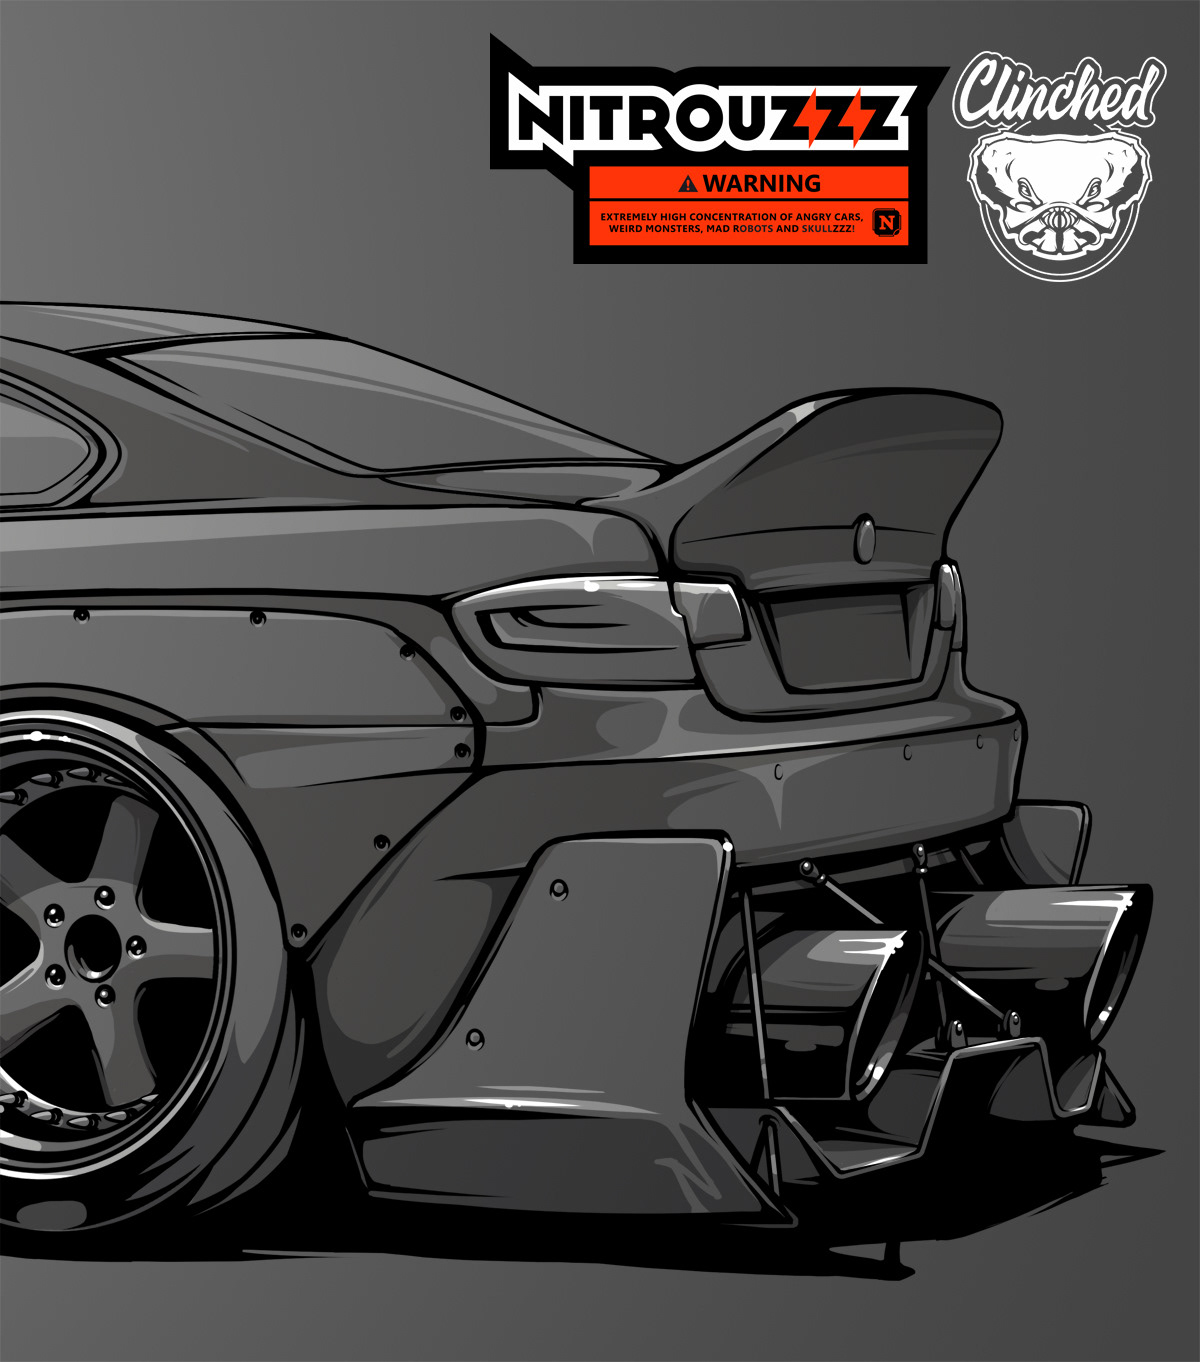 nitrouzzz beastedup BMW E92 tuning stance teeth evil angry